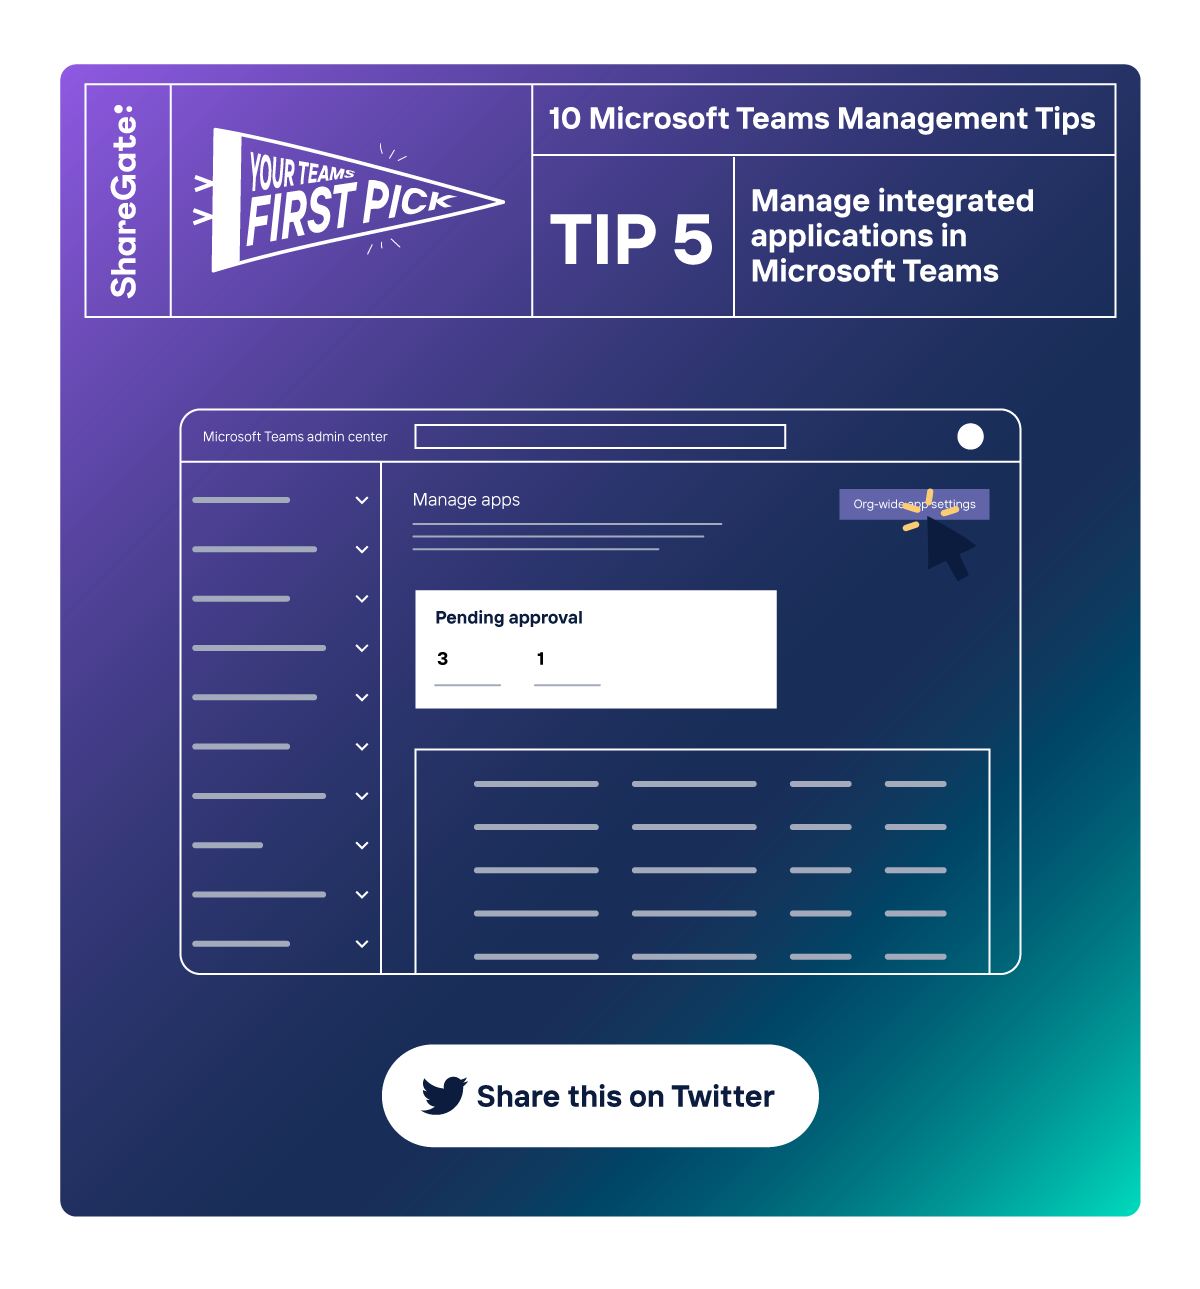 Illustrated infographic showing tip #5: Manage integrated applications in Microsoft Teams.